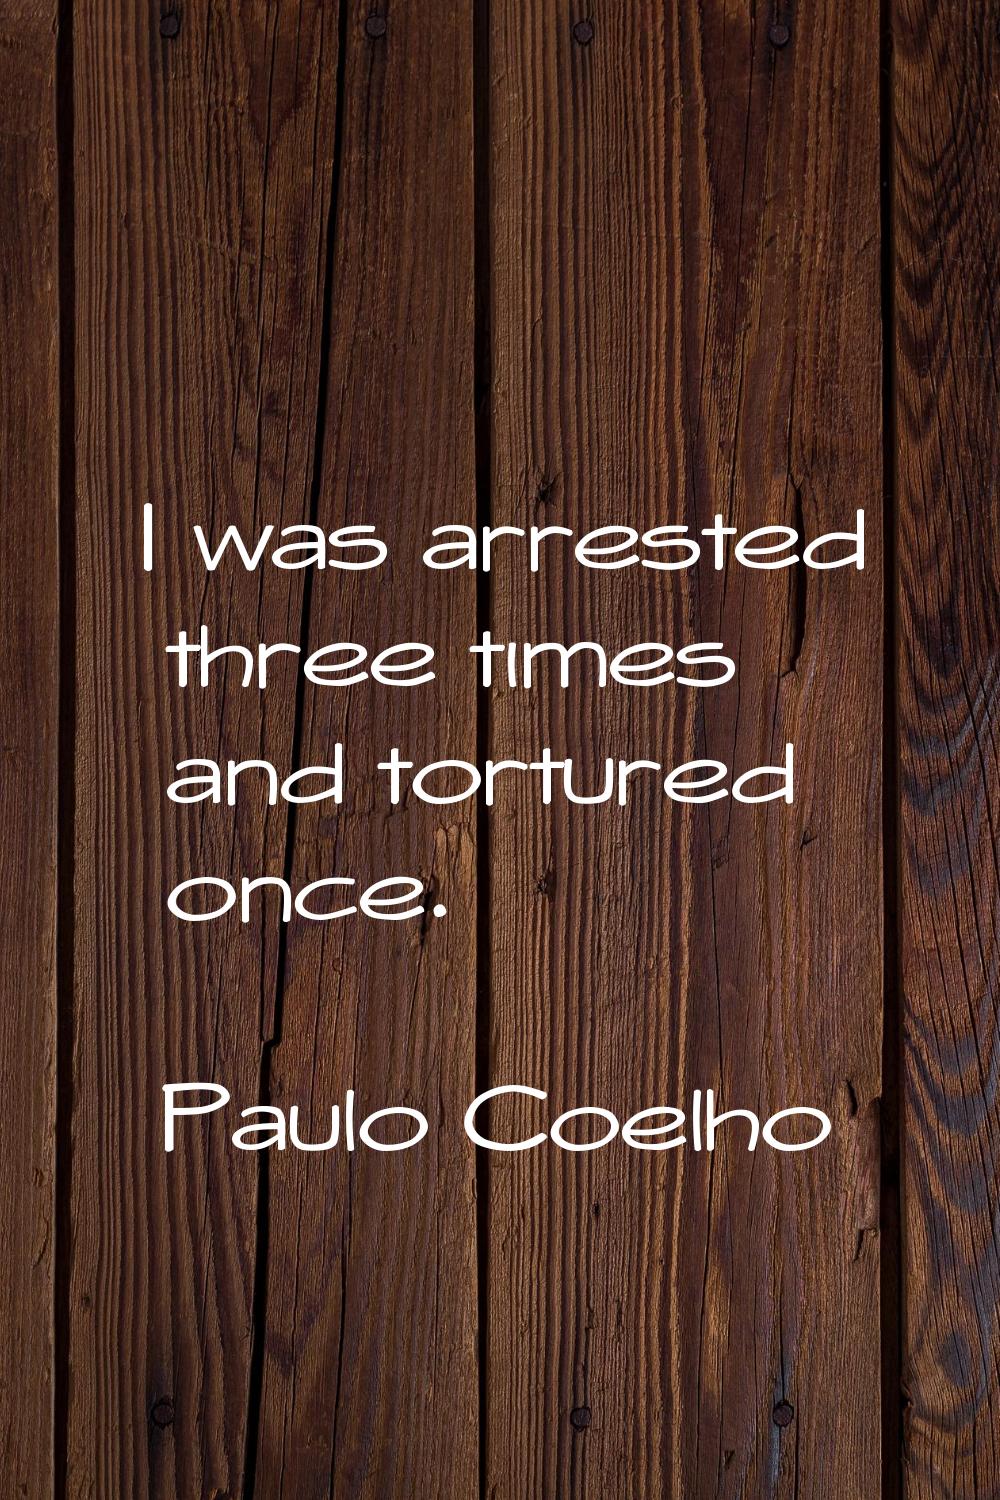 I was arrested three times and tortured once.